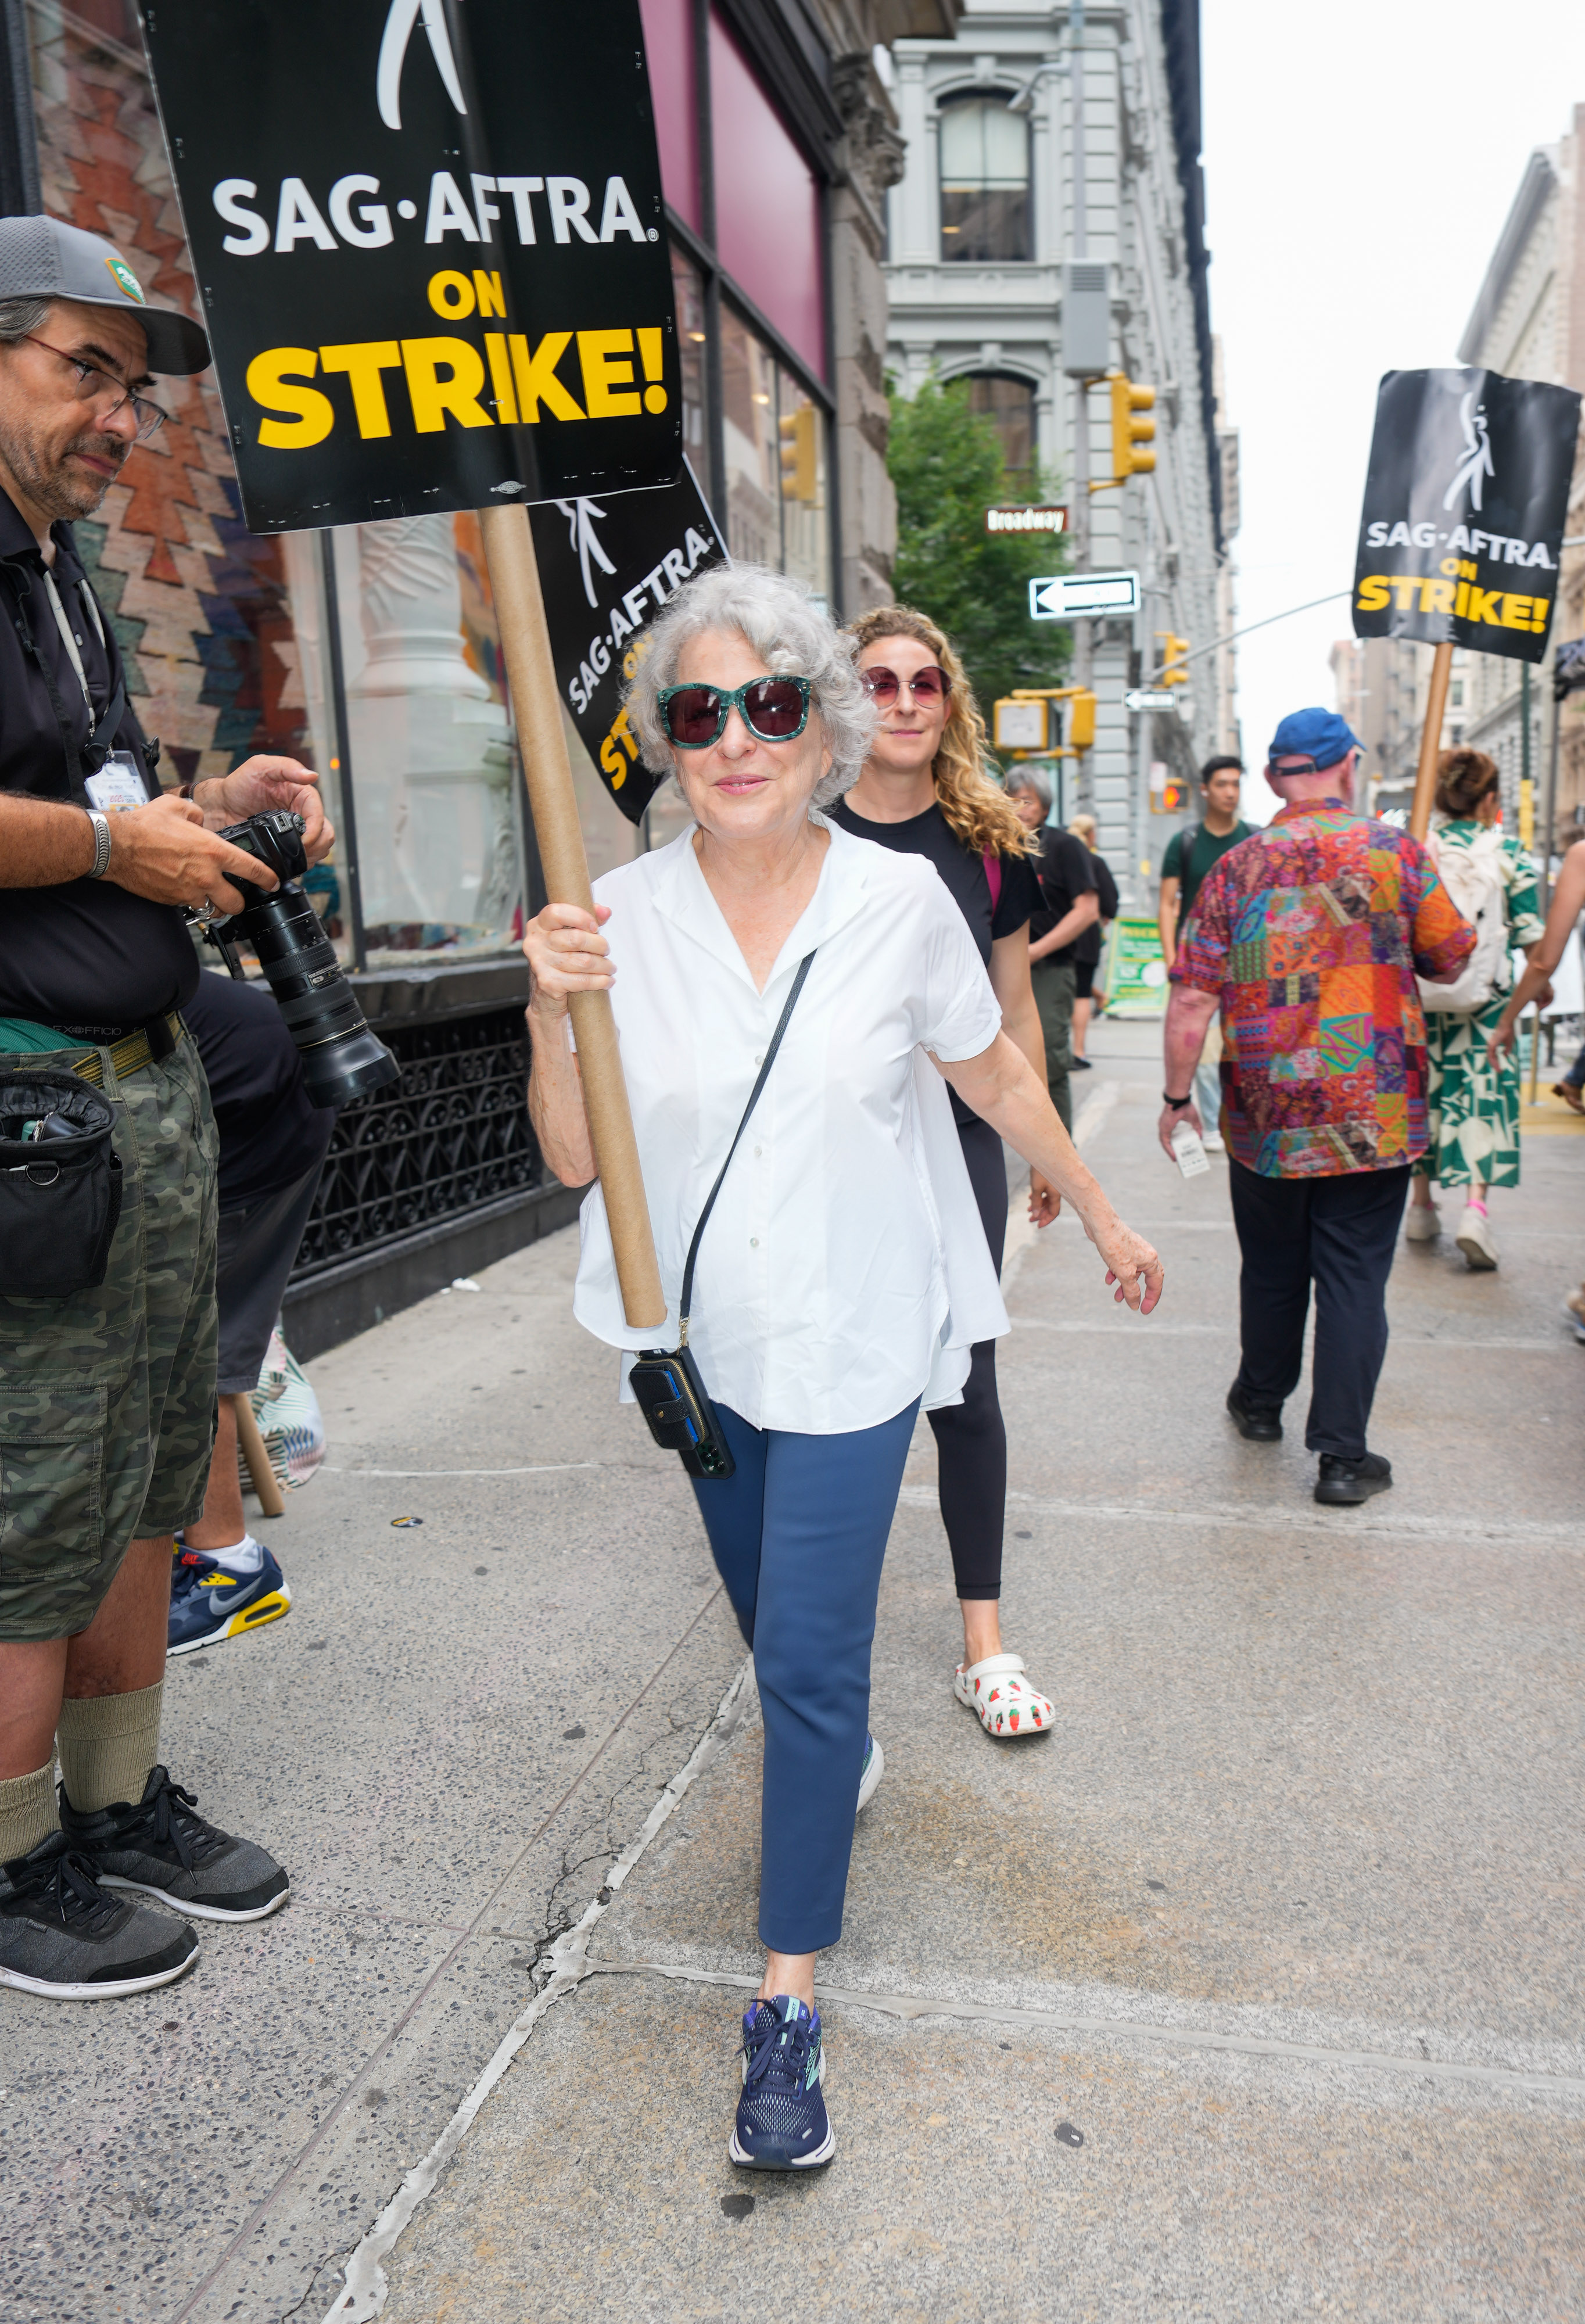 Bette Midler with her daughter Sophie von Haselberg behind her at a SAG-AFTRA strike in New York City, 2023 | Source: Getty Images